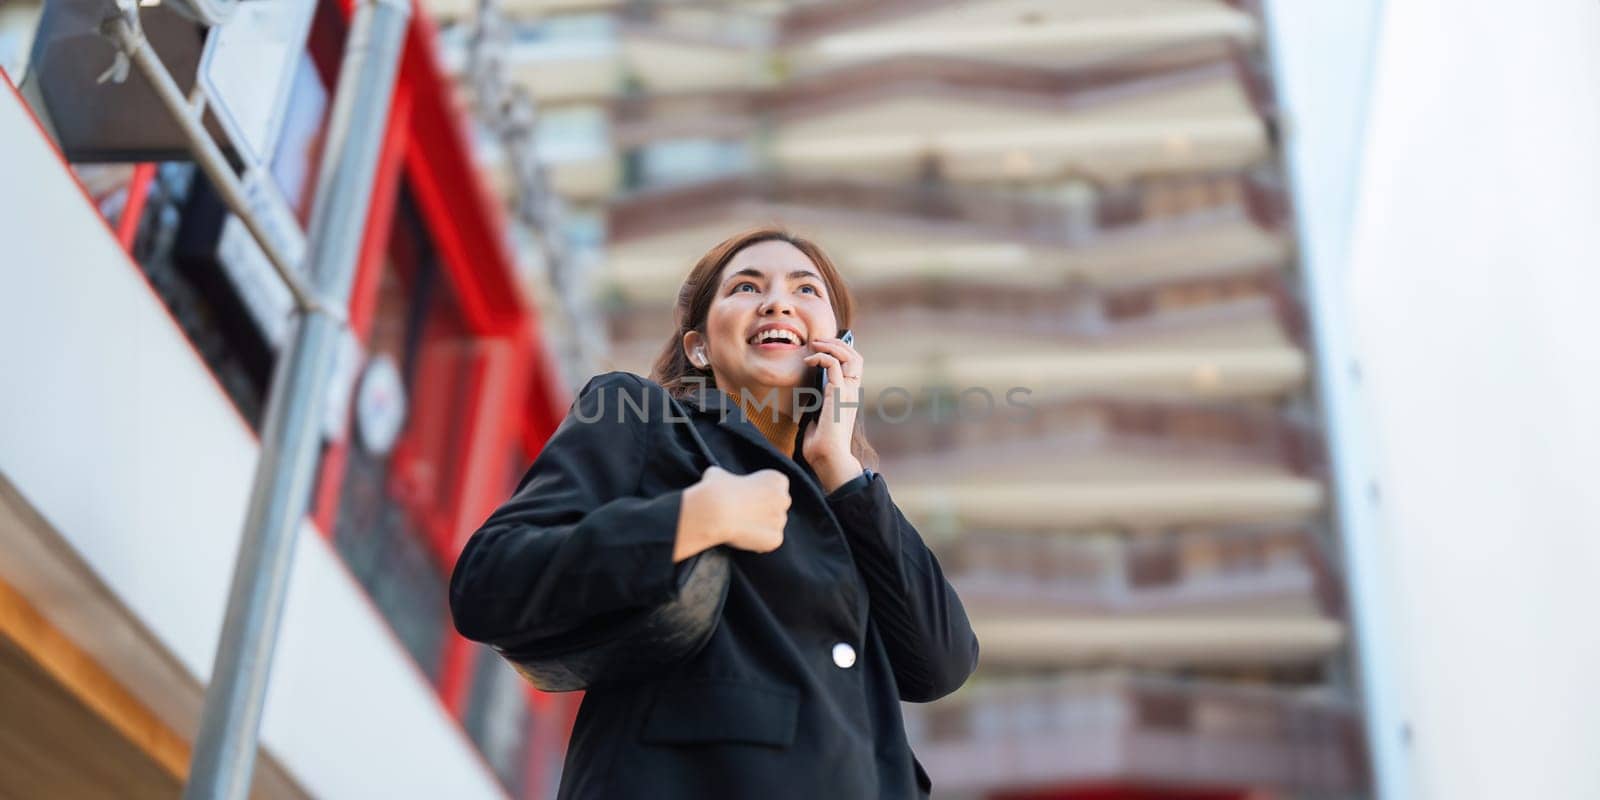 Business woman successful using smartphone walking outdoors to work. beautiful woman going to working with smartphone walking near office building by nateemee